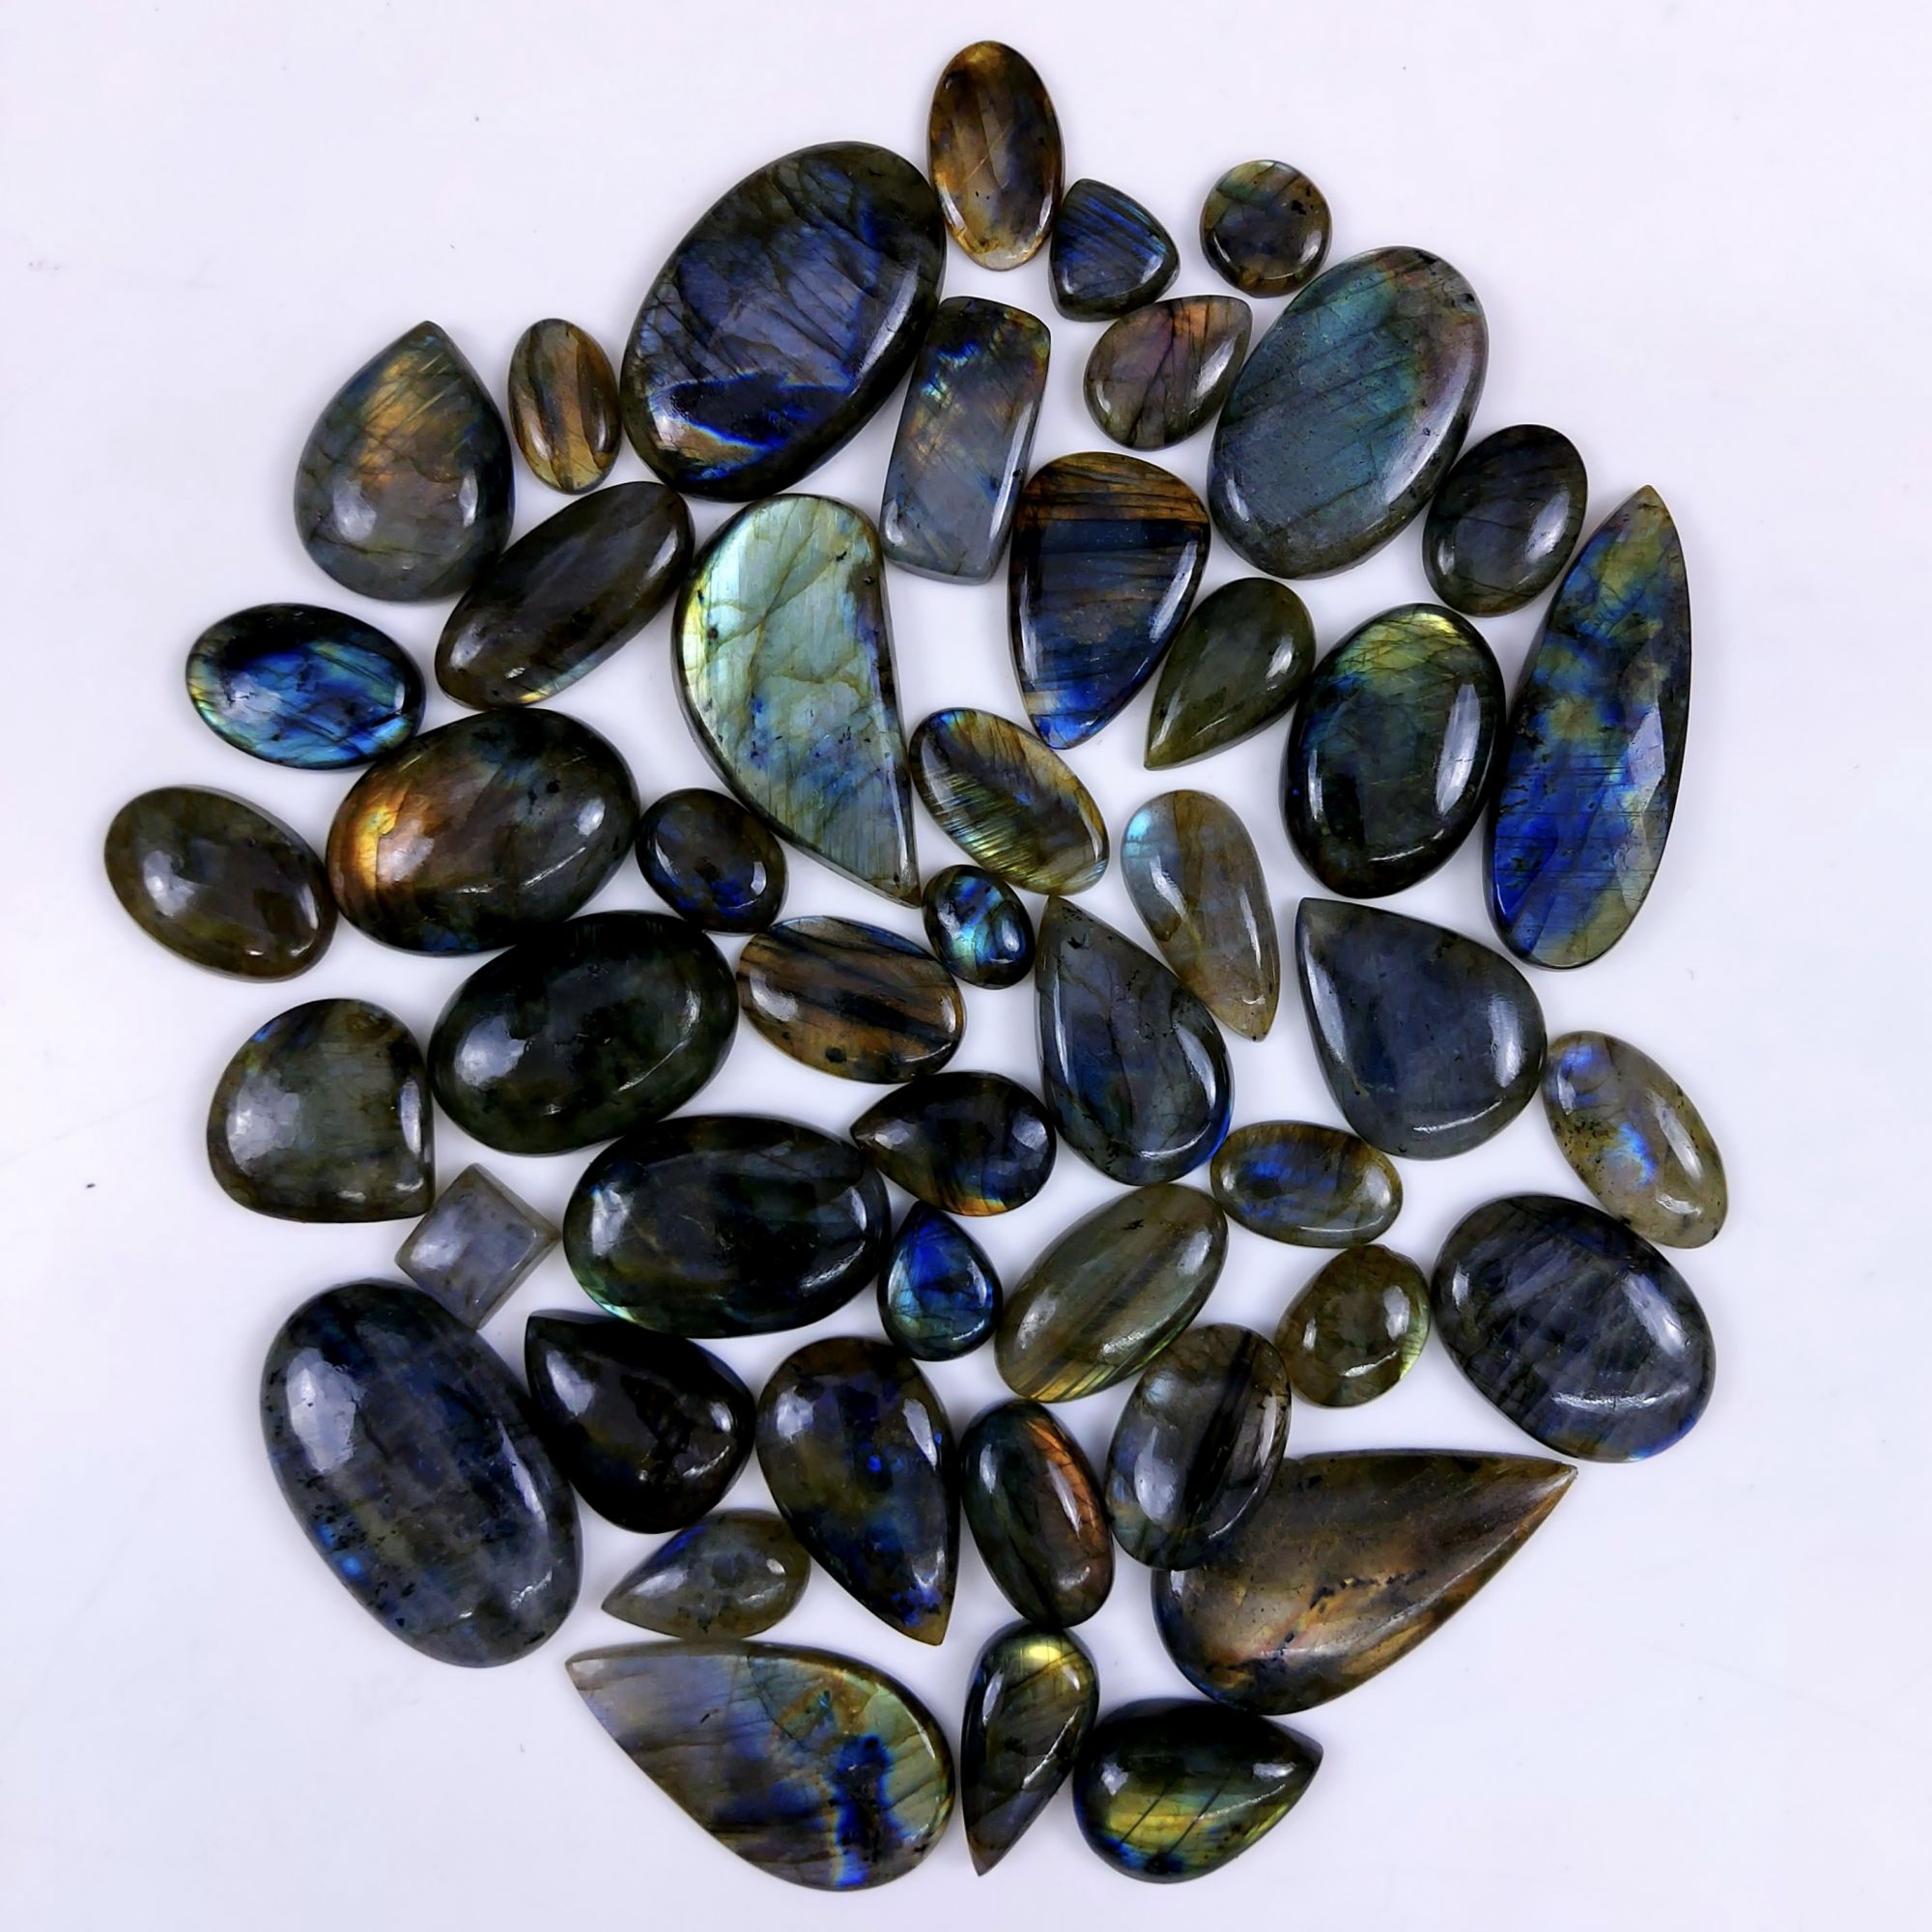 47pc 1595Cts Labradorite Cabochon Multifire Healing Crystal For Jewelry Supplies, Labradorite Necklace Handmade Wire Wrapped Gemstone Pendant 55x20 18x14 mm#6299